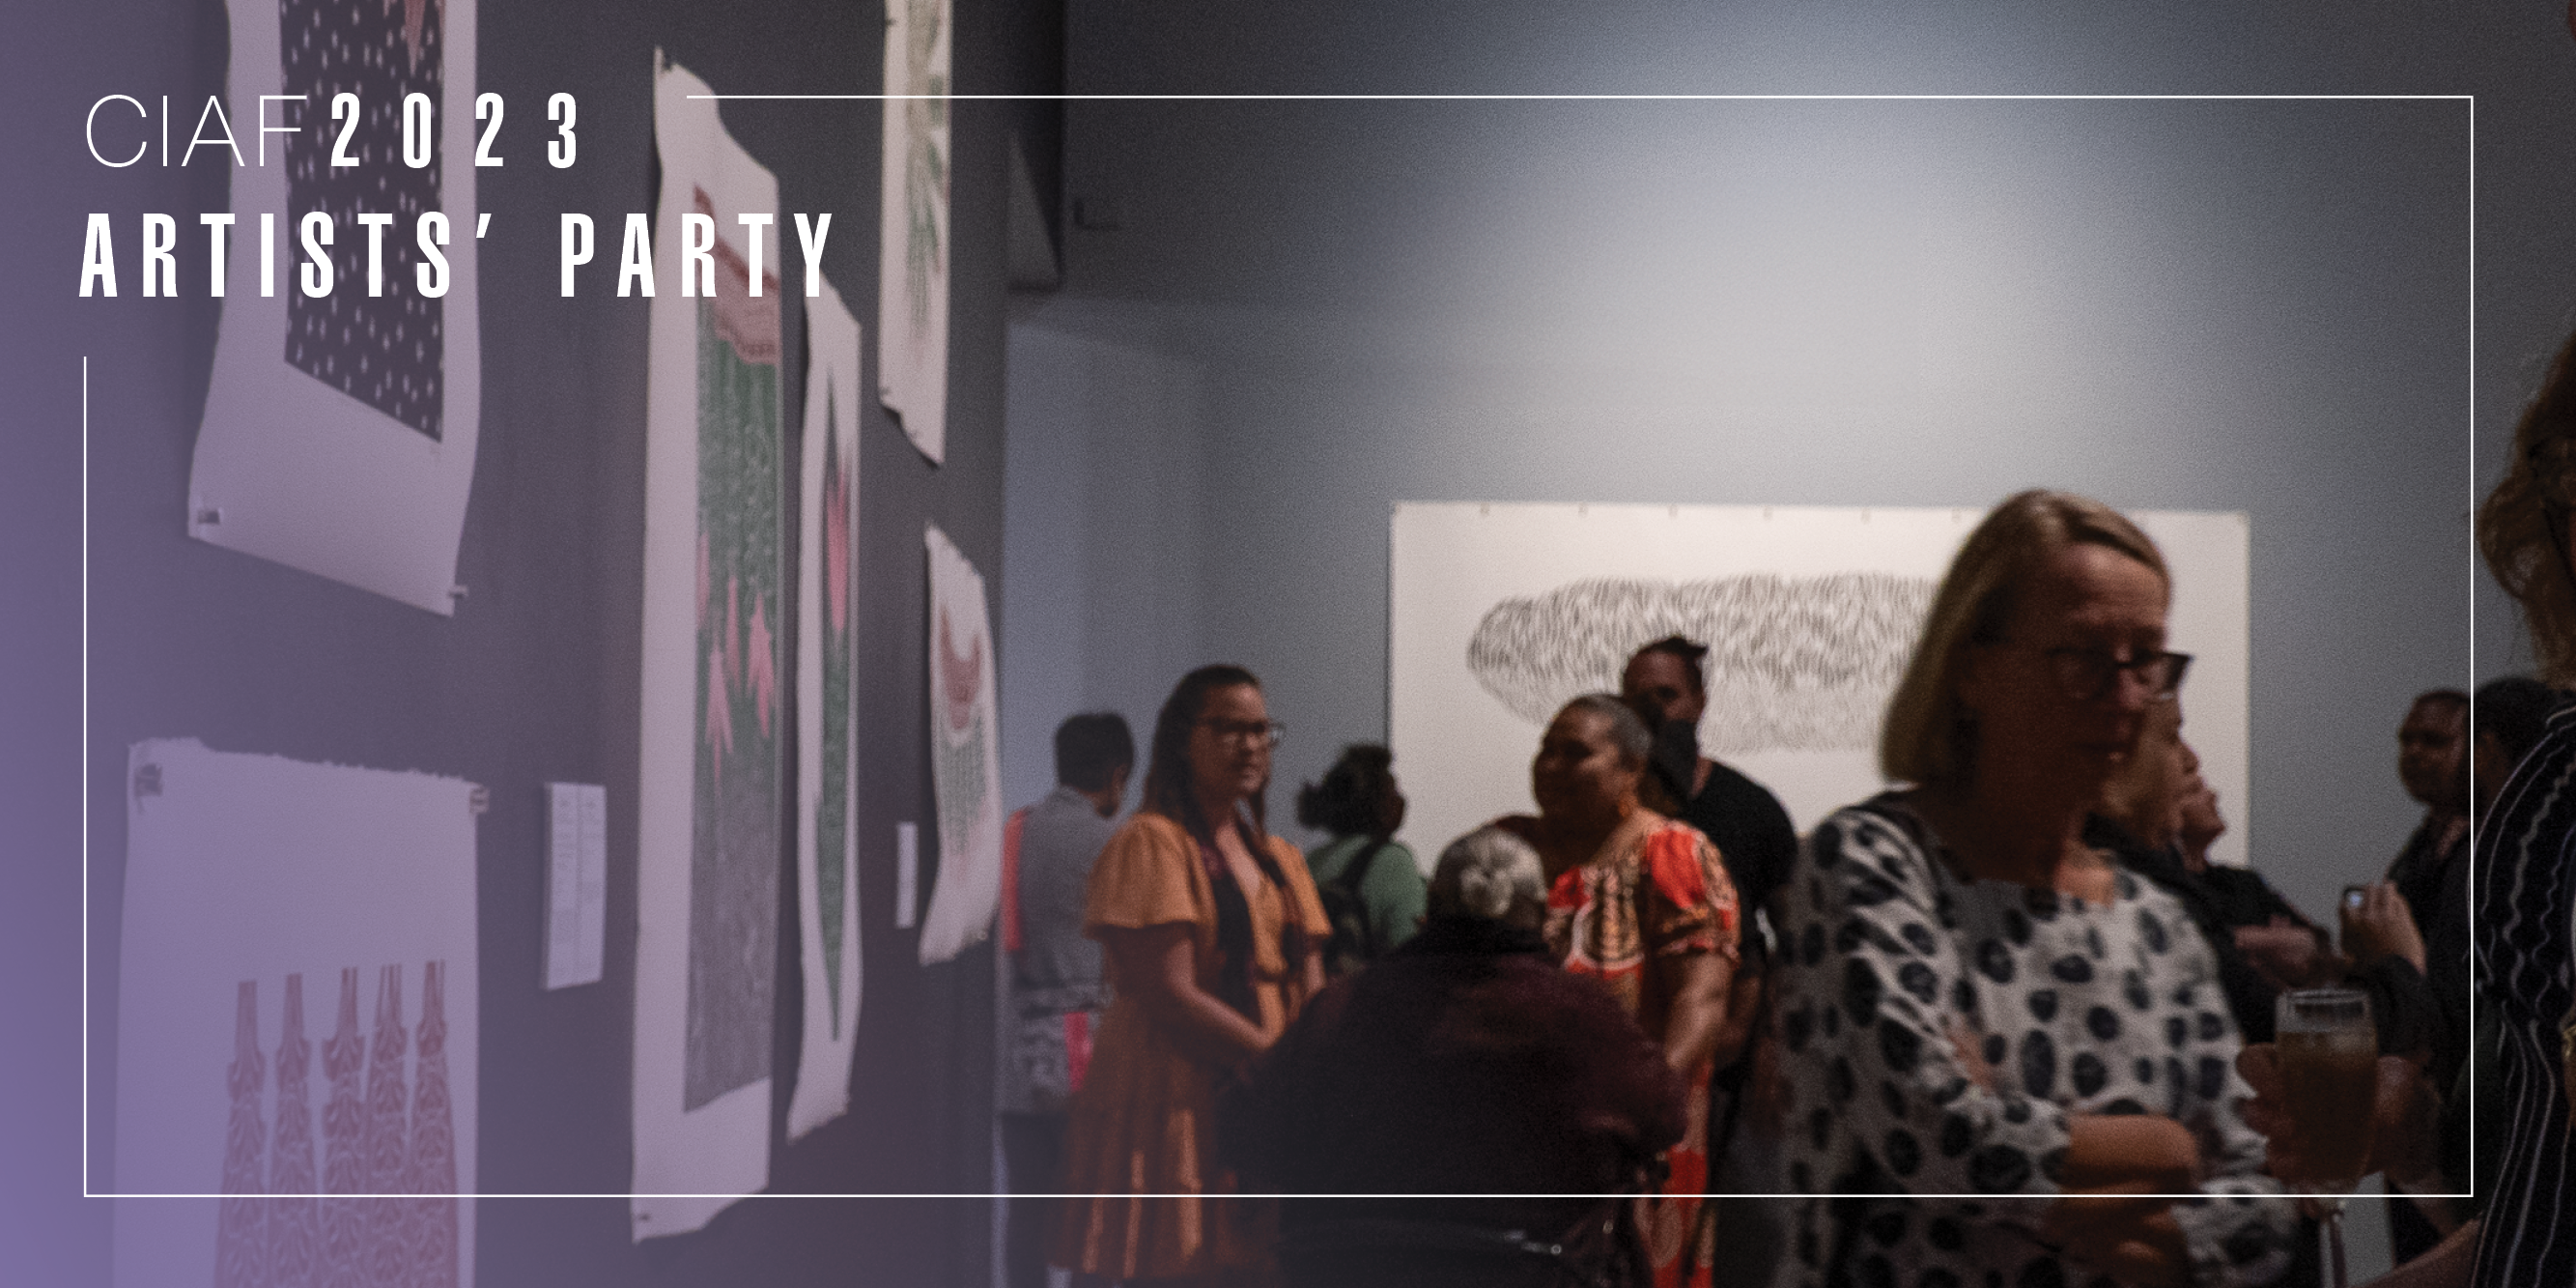 a group of people in a gallery space with prints on the grey walls. The text "CIAF 2023 Artists' Party" is in the top left corner.